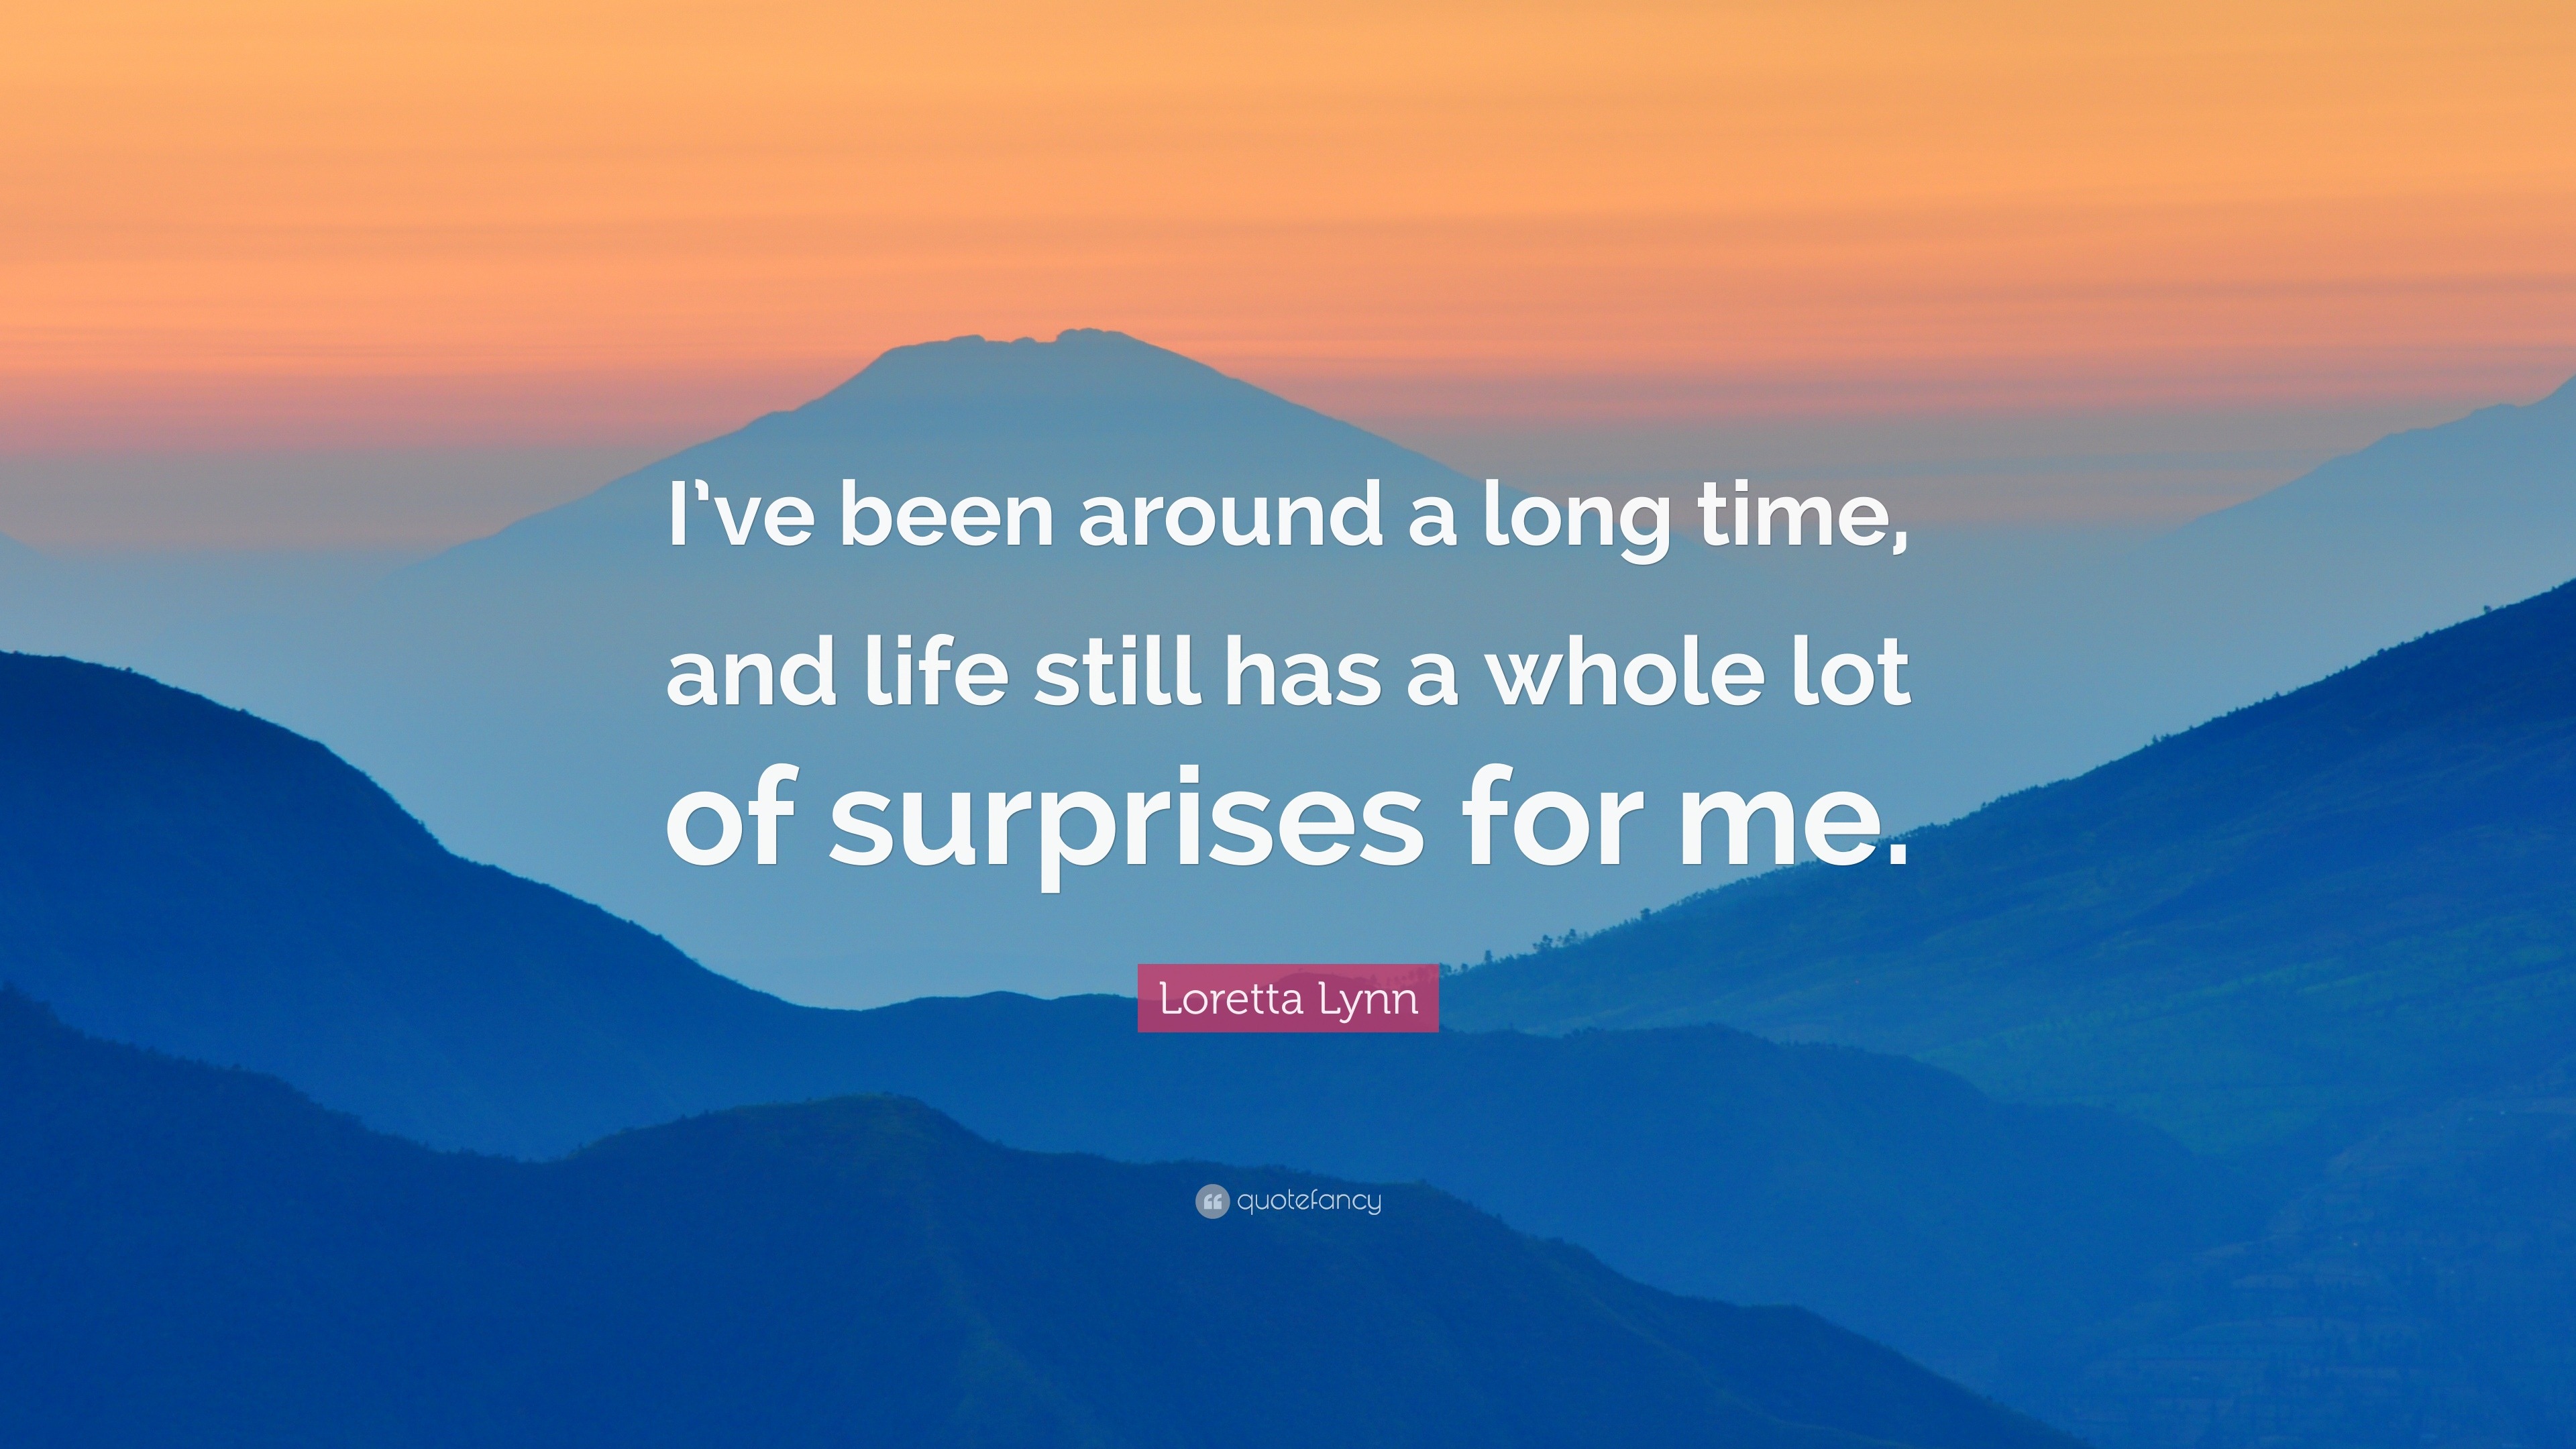 Loretta Lynn Quote: “I’ve been around a long time, and life still has a ...